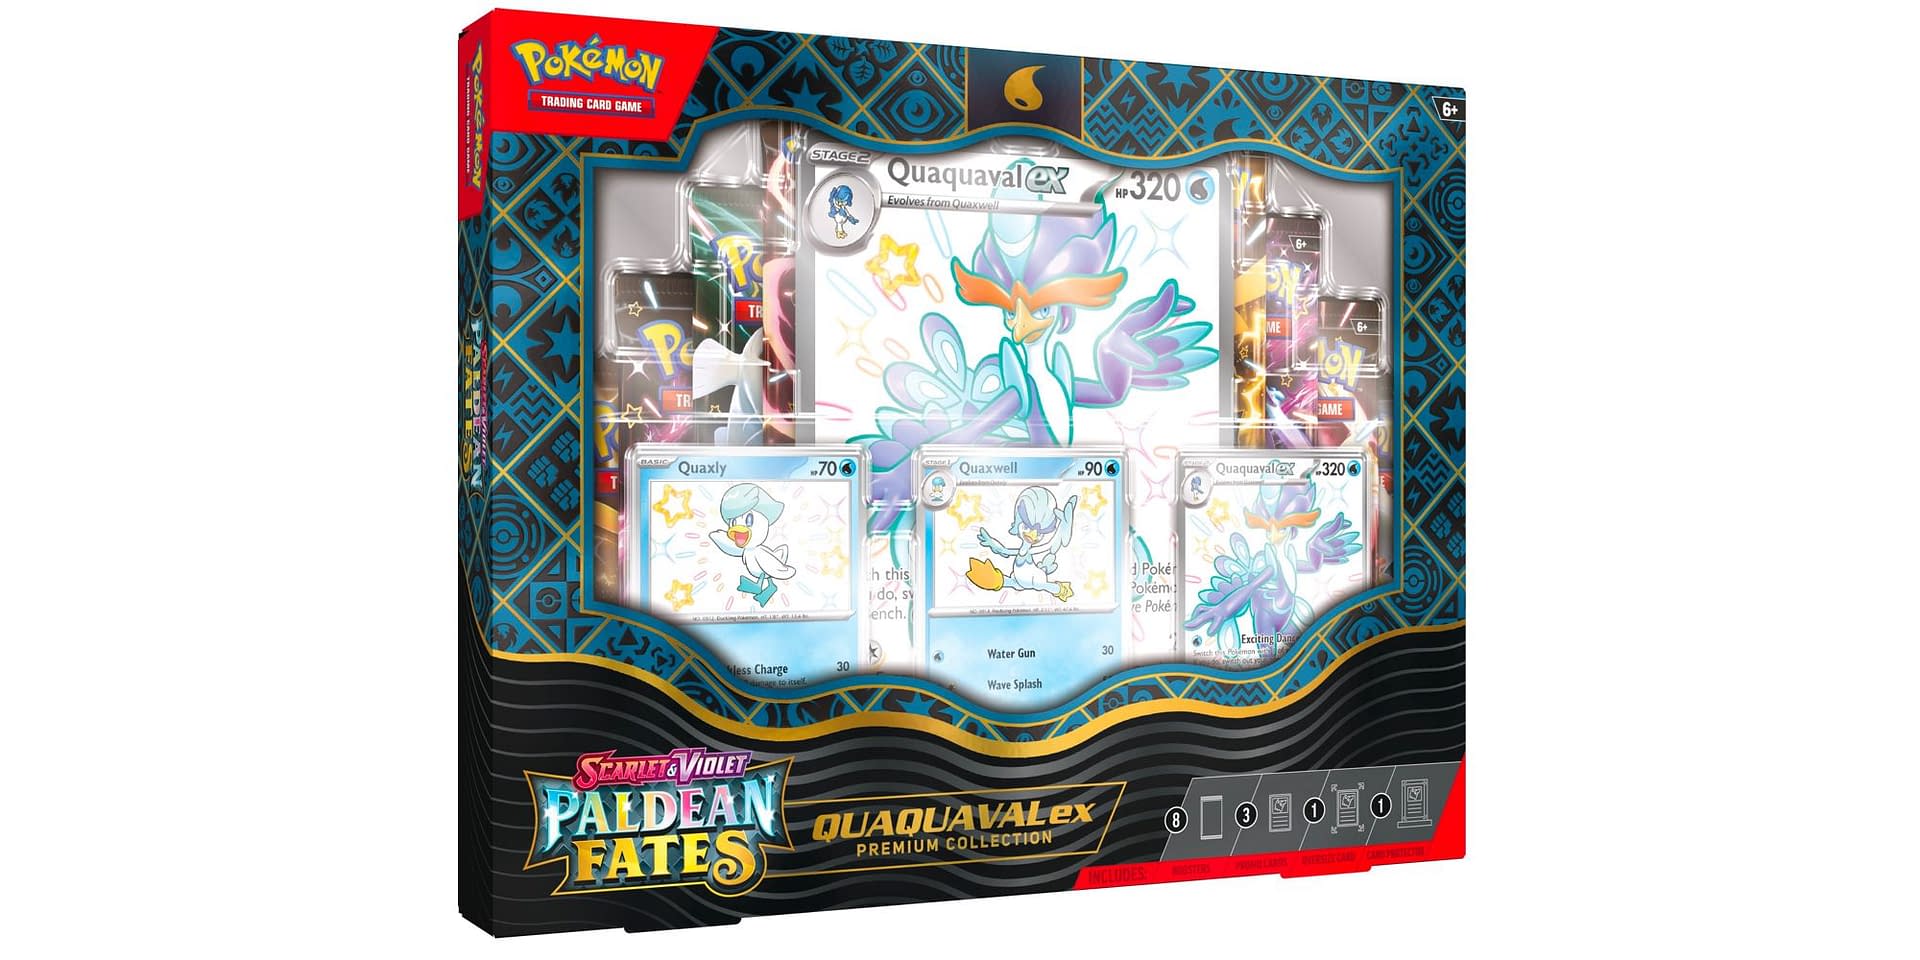 PokéMOM - Daily TCG Deals and Updates on X: The promo card is going to be  a full art shiny mimikyu!!!!!  / X